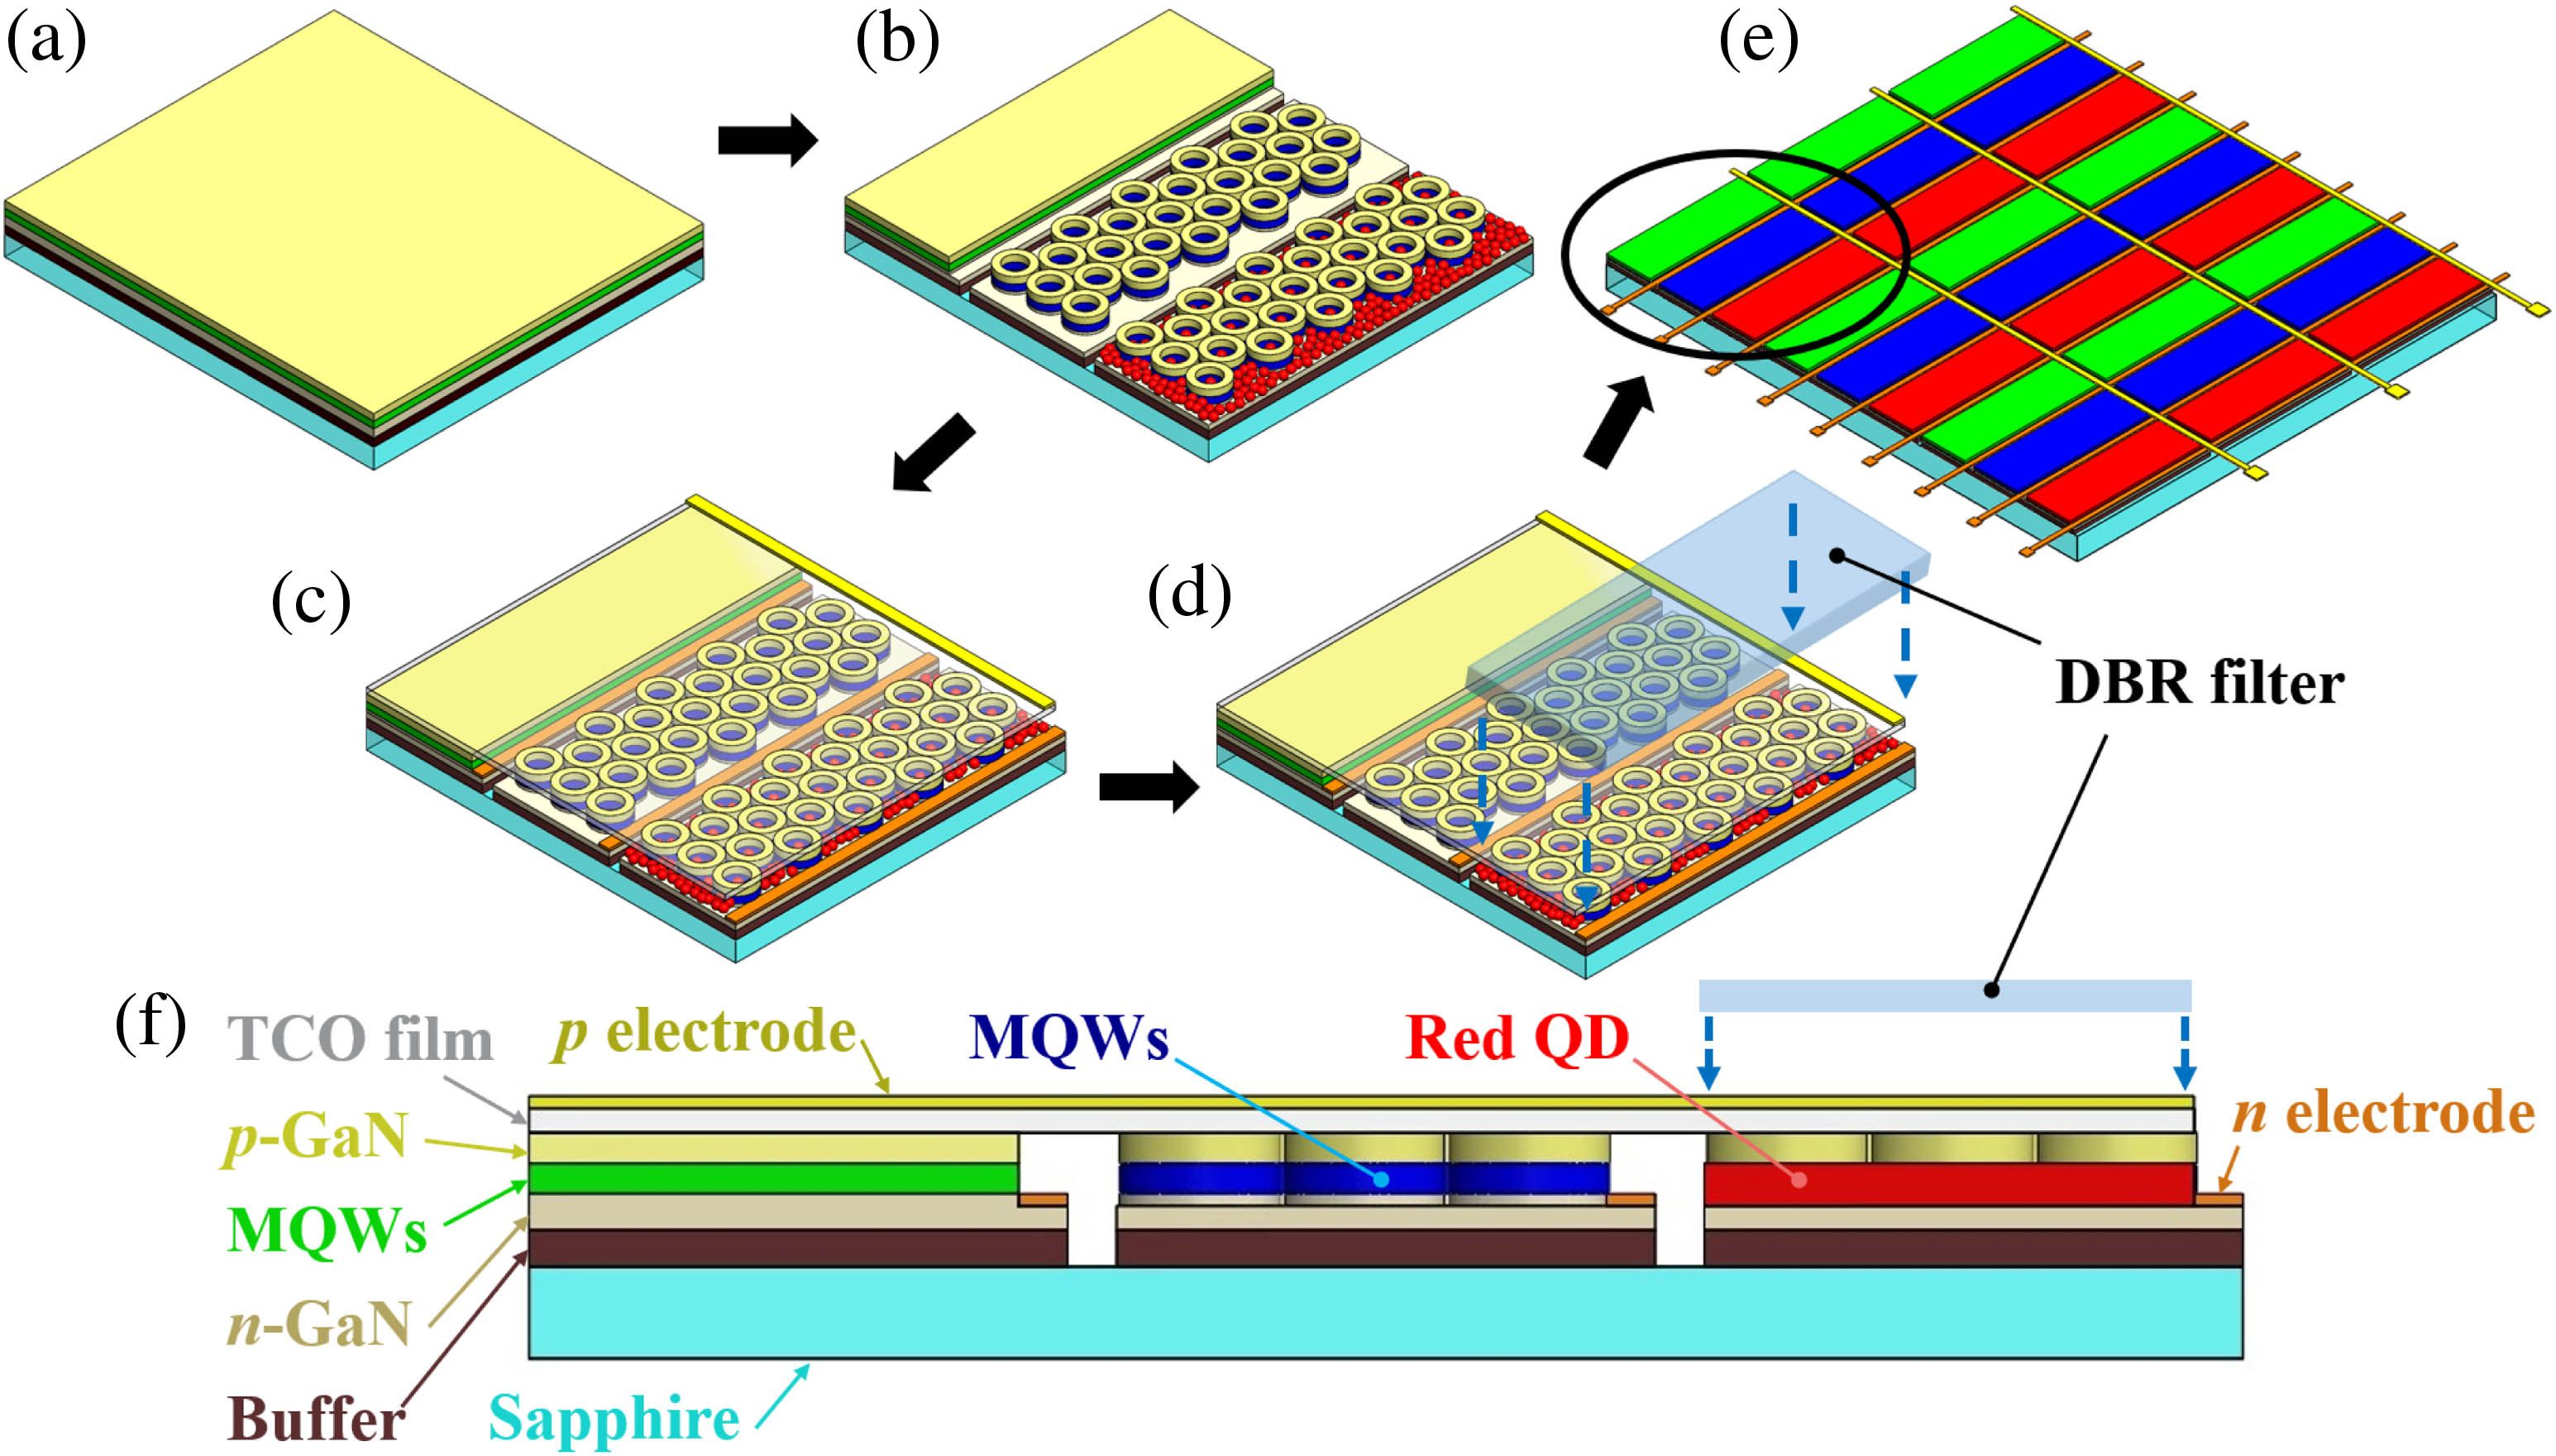 (a) Epitaxial wafer; (b) three subpixels of a green μLED, a blue NR-μLED, and a red QD-NR-μLED; (c) deposition of TCO film and pn electrodes; (d) covering DBR filter; (e) full-color display panel composed of the proposed hybrid QD-NR-μLEDs; (f) cross-sectional view of a single RGB pixel.